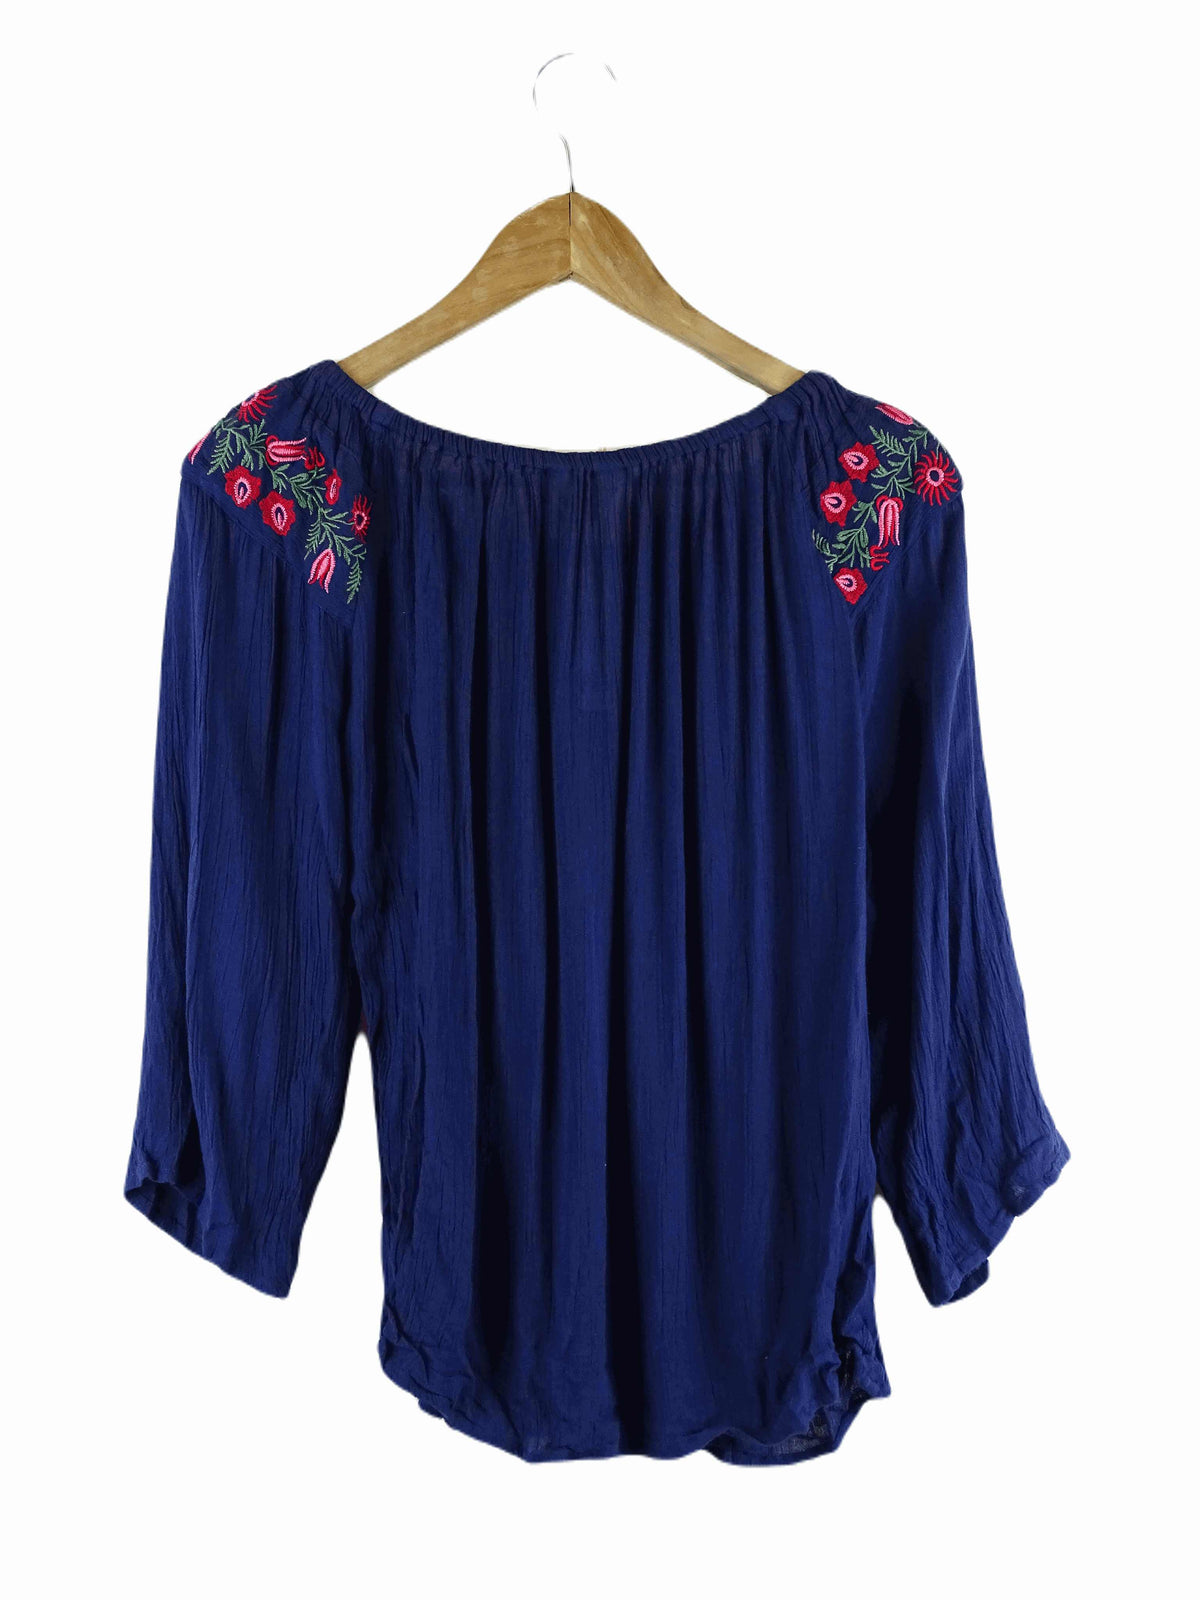 Bhoma Couture Blue and Pink Off-The-Shoulder Top XL